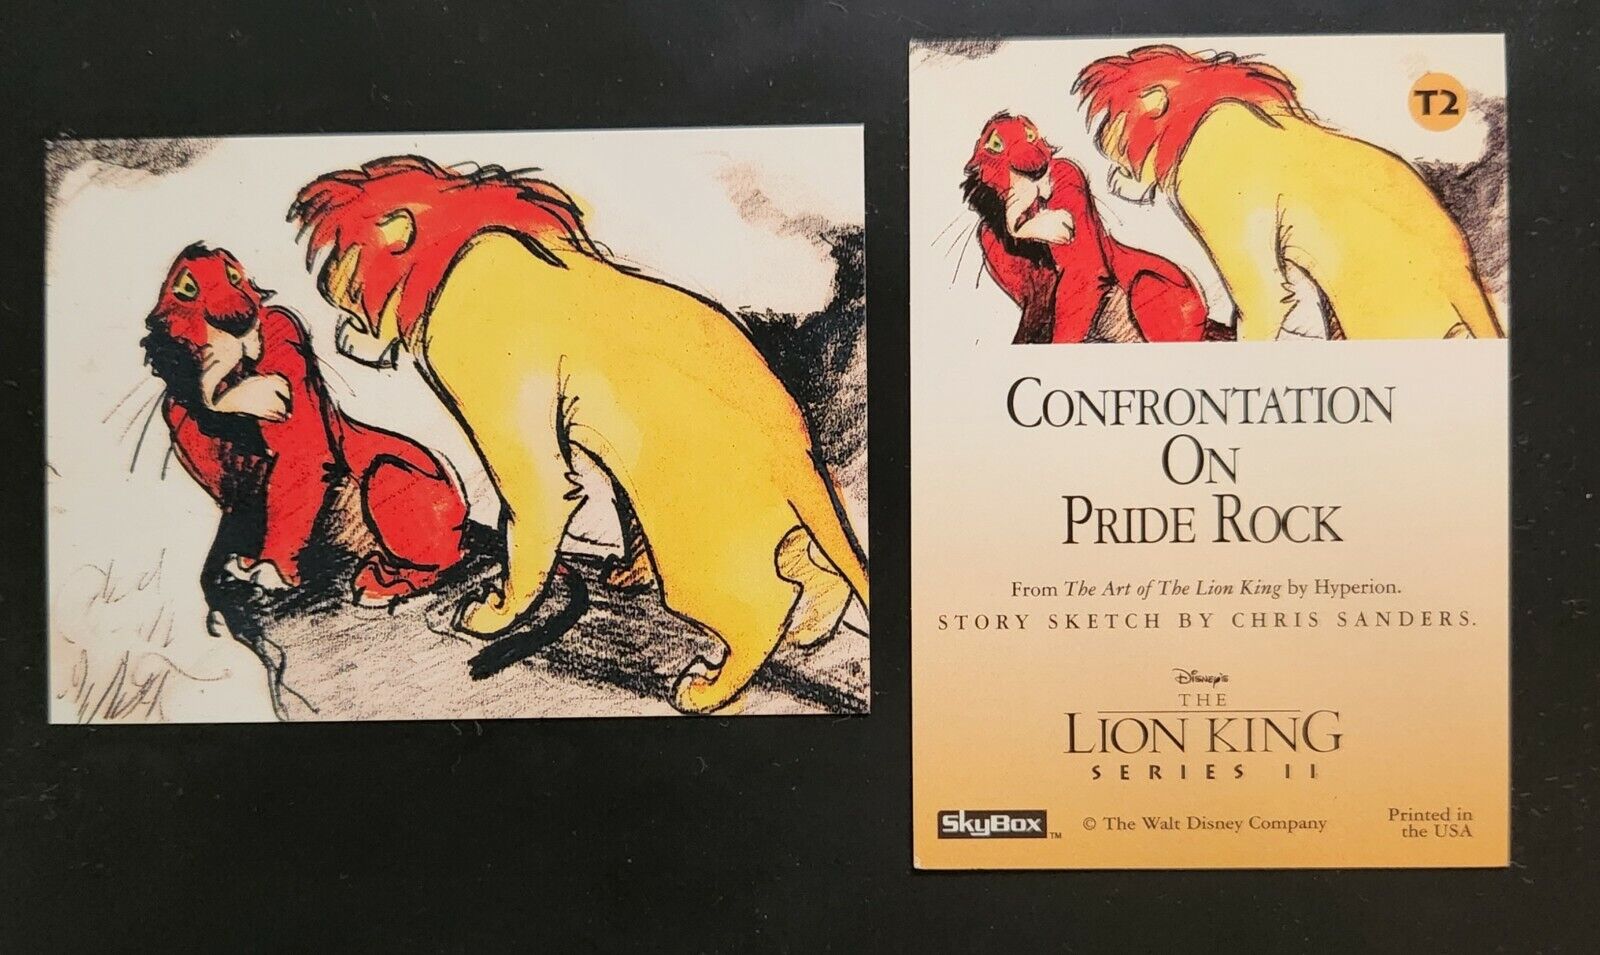 Lion King Series II Thermography Art Chase Insert Card T2 Skybox